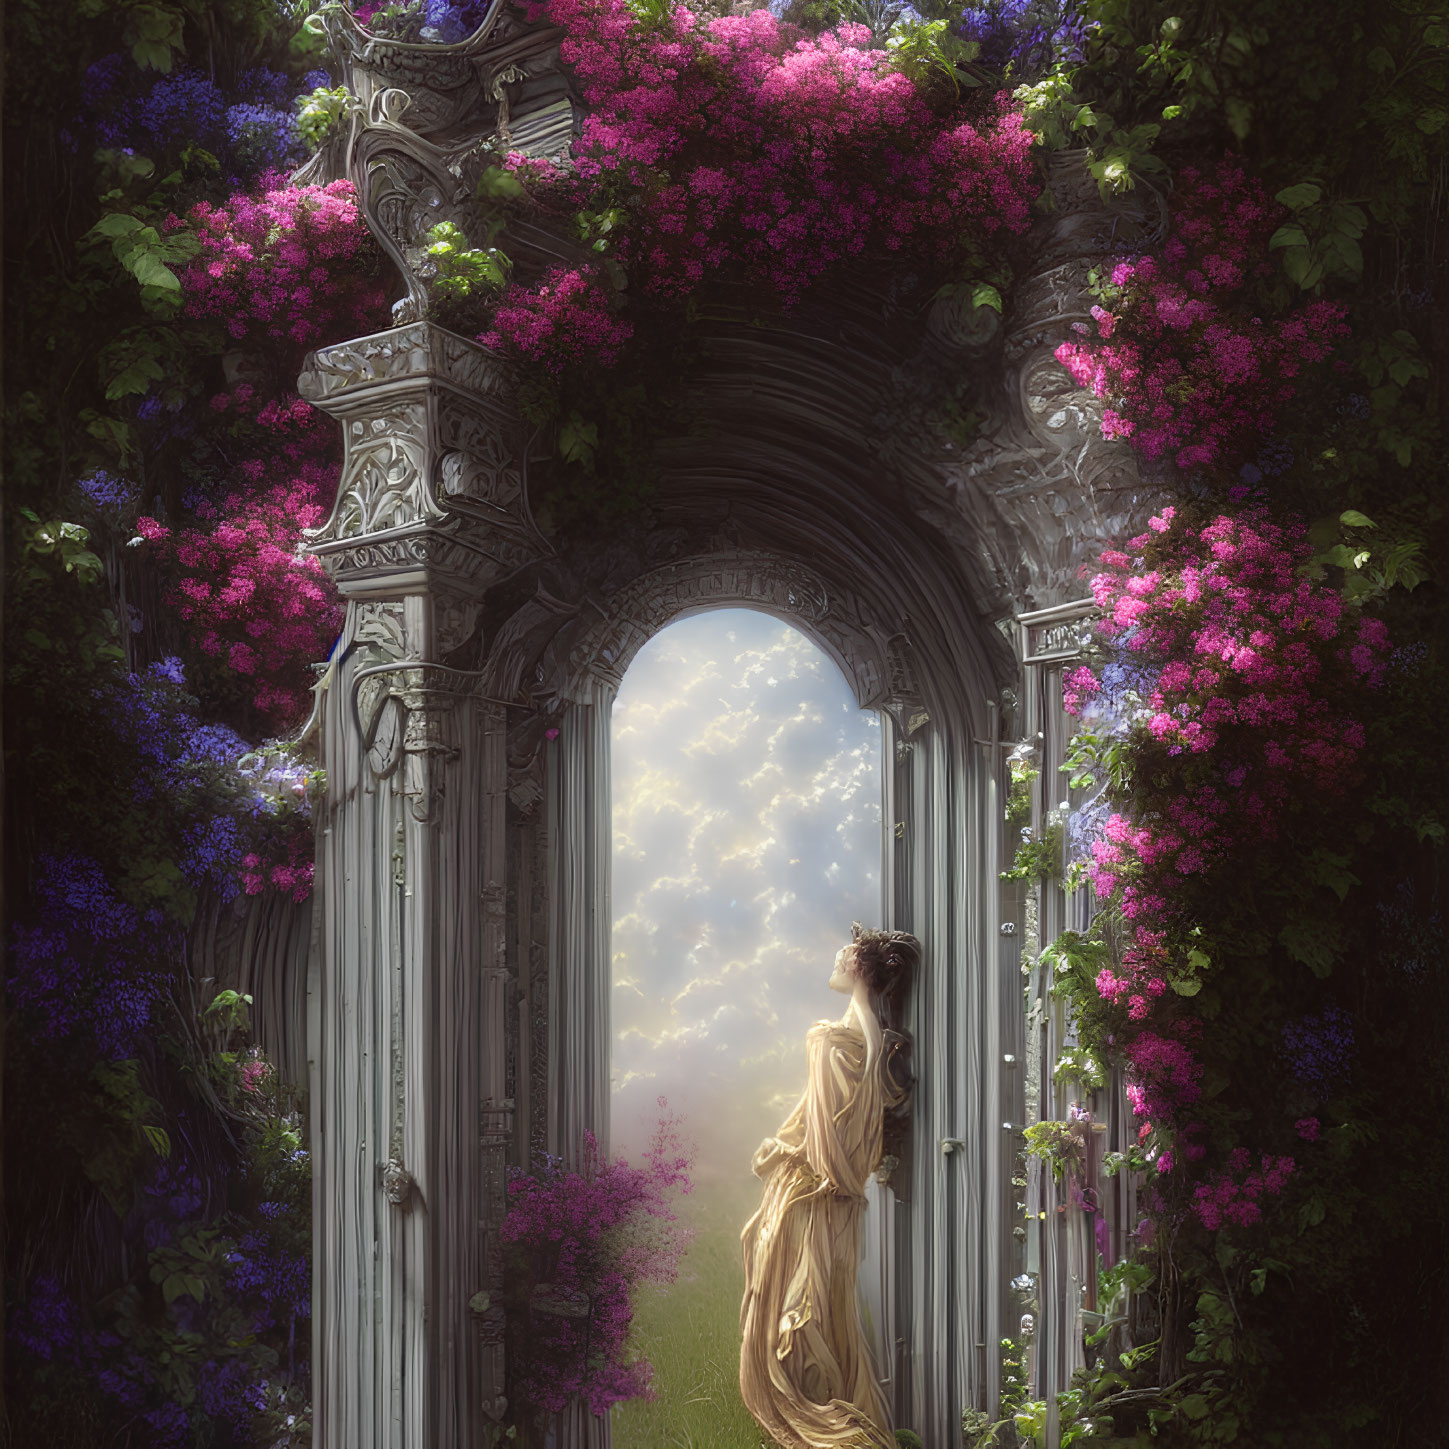 Person in flowing dress by ornate open door amidst lush flowers